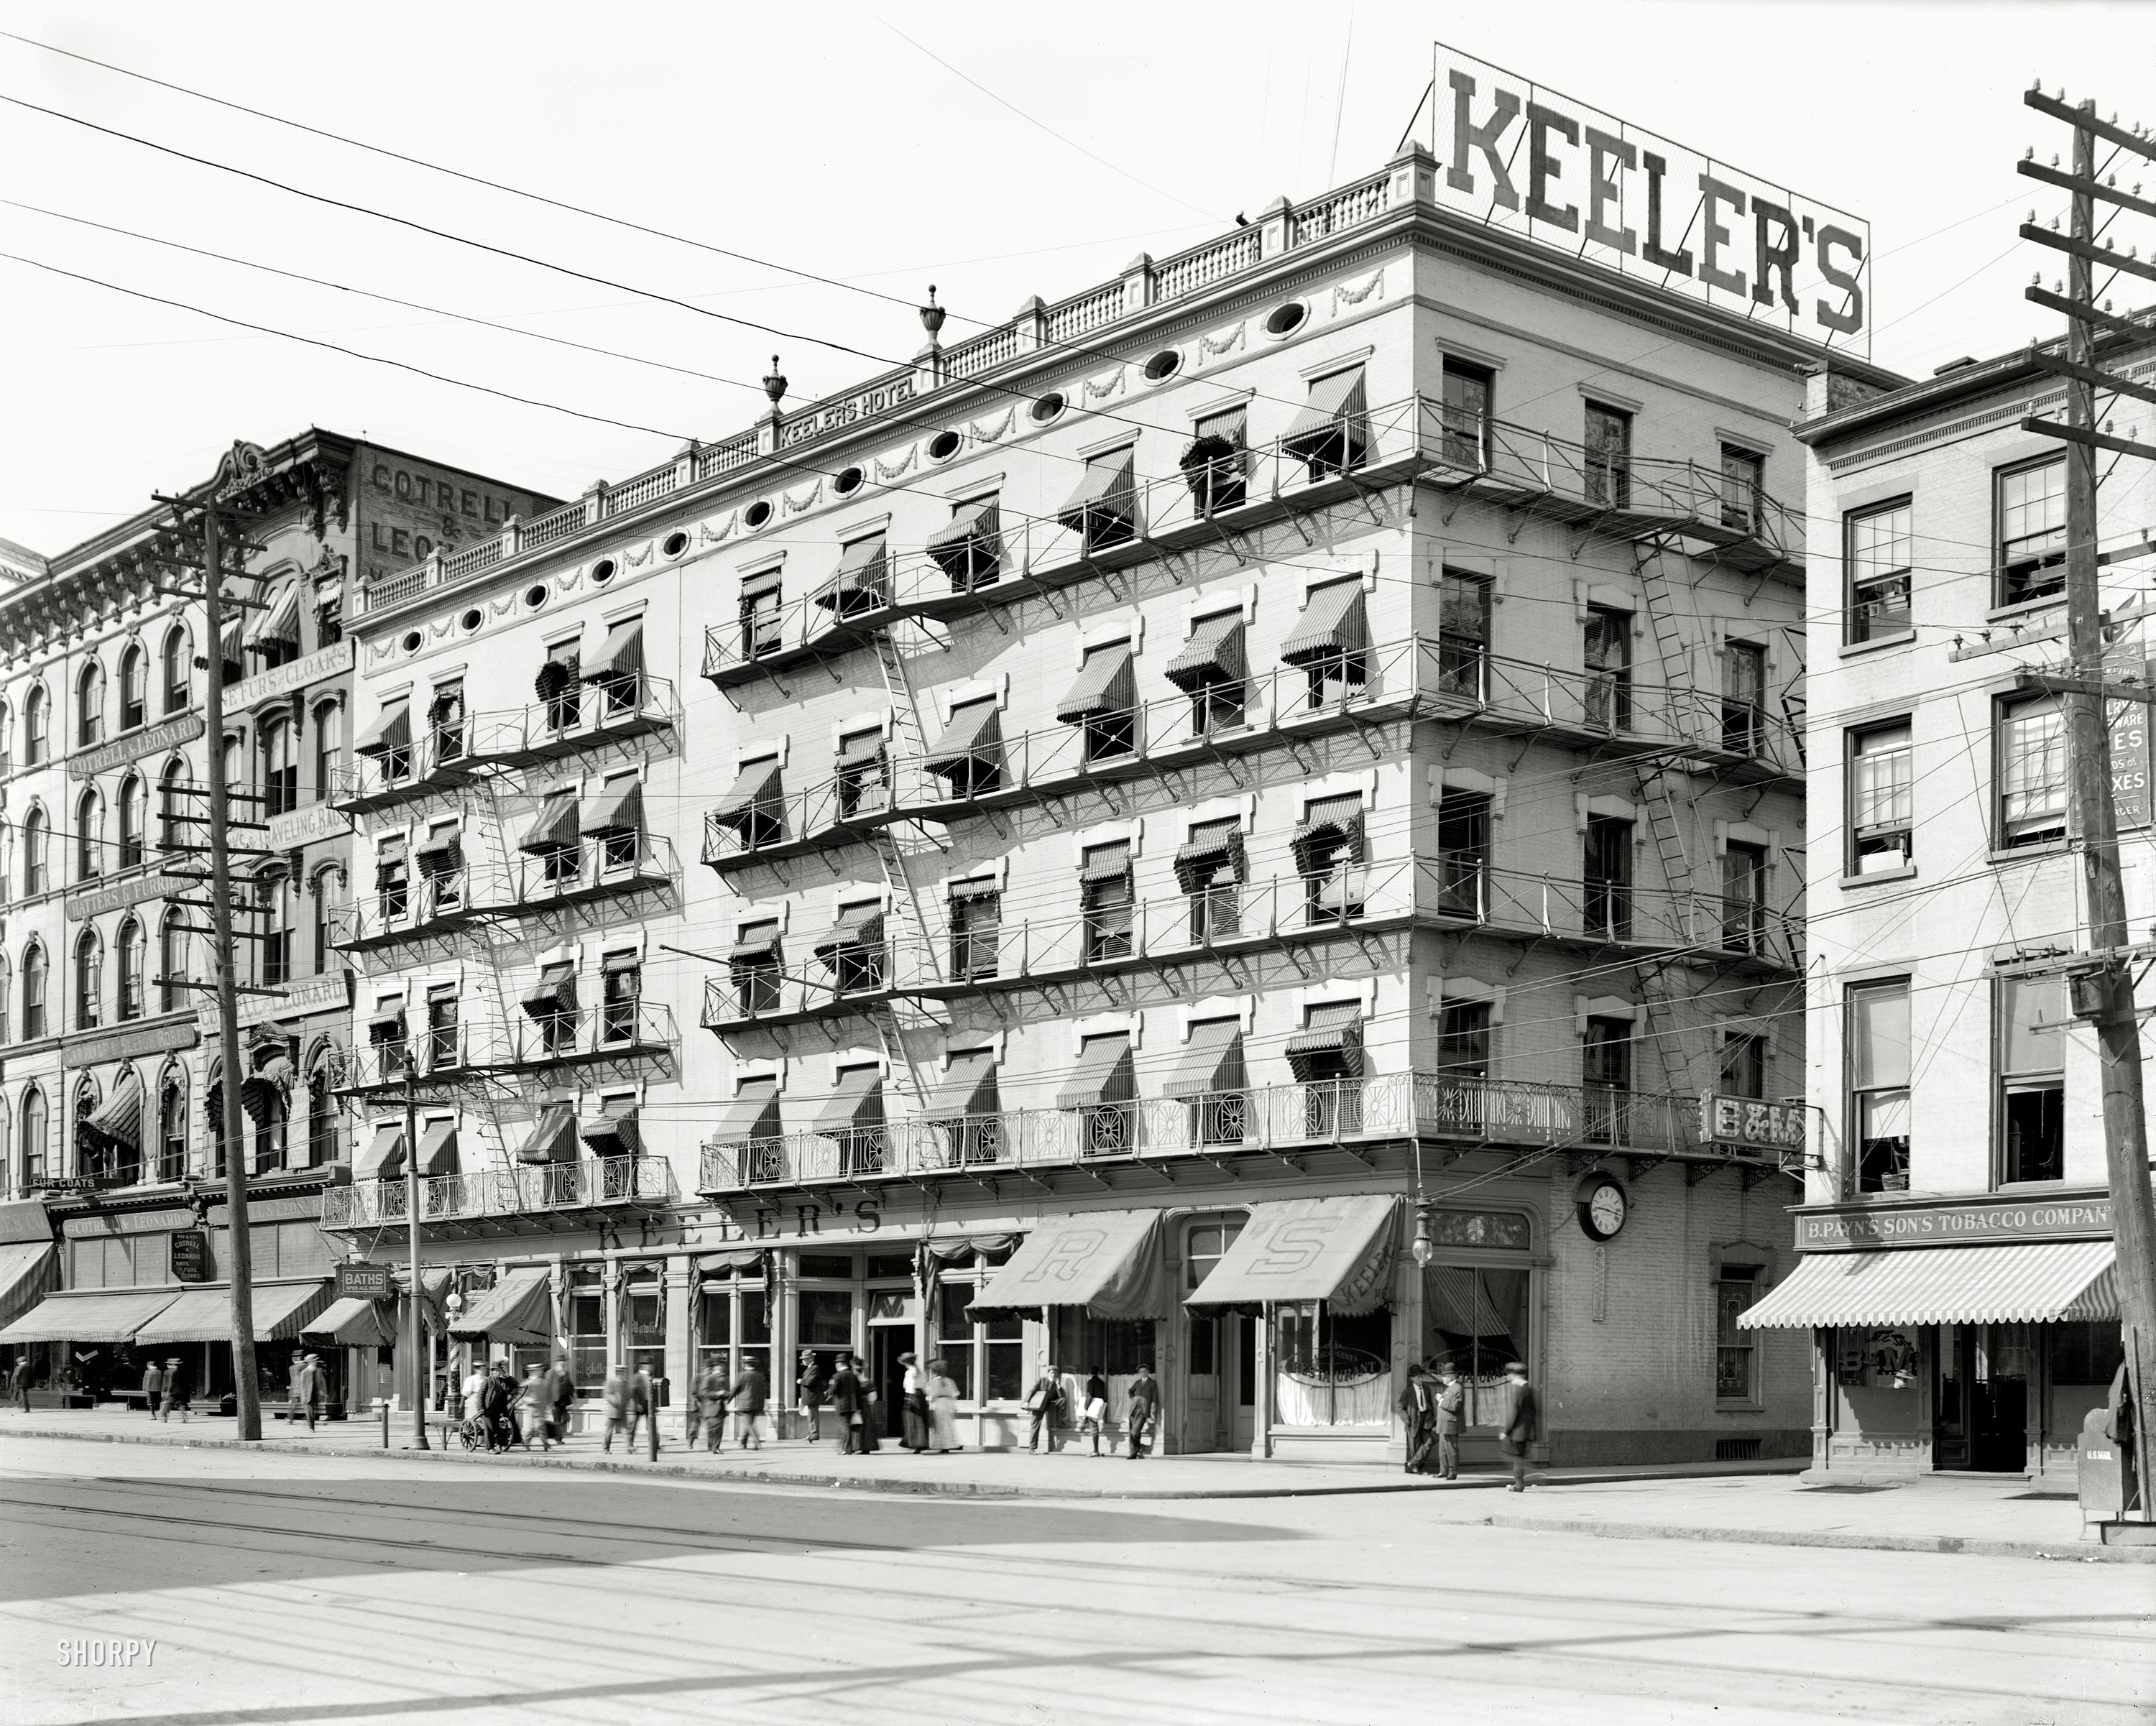 Albany, New York, circa 1908. "Keeler's Hotel." Next door, one category of retailing that's taken a hit over the years: "Carriage & Sleigh Robes." 6½x8½ inch dry plate glass negative, Detroit Publishing Company. View full size.